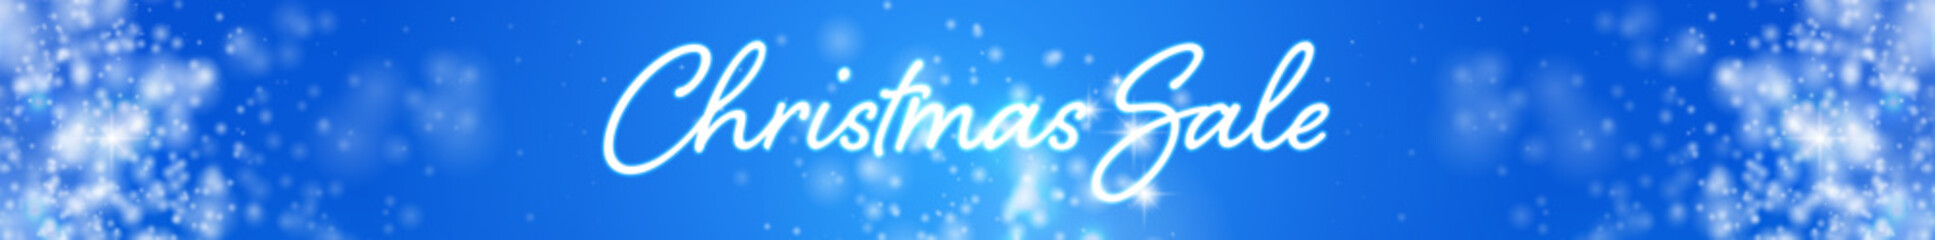 Christmas banner with glittering blue background